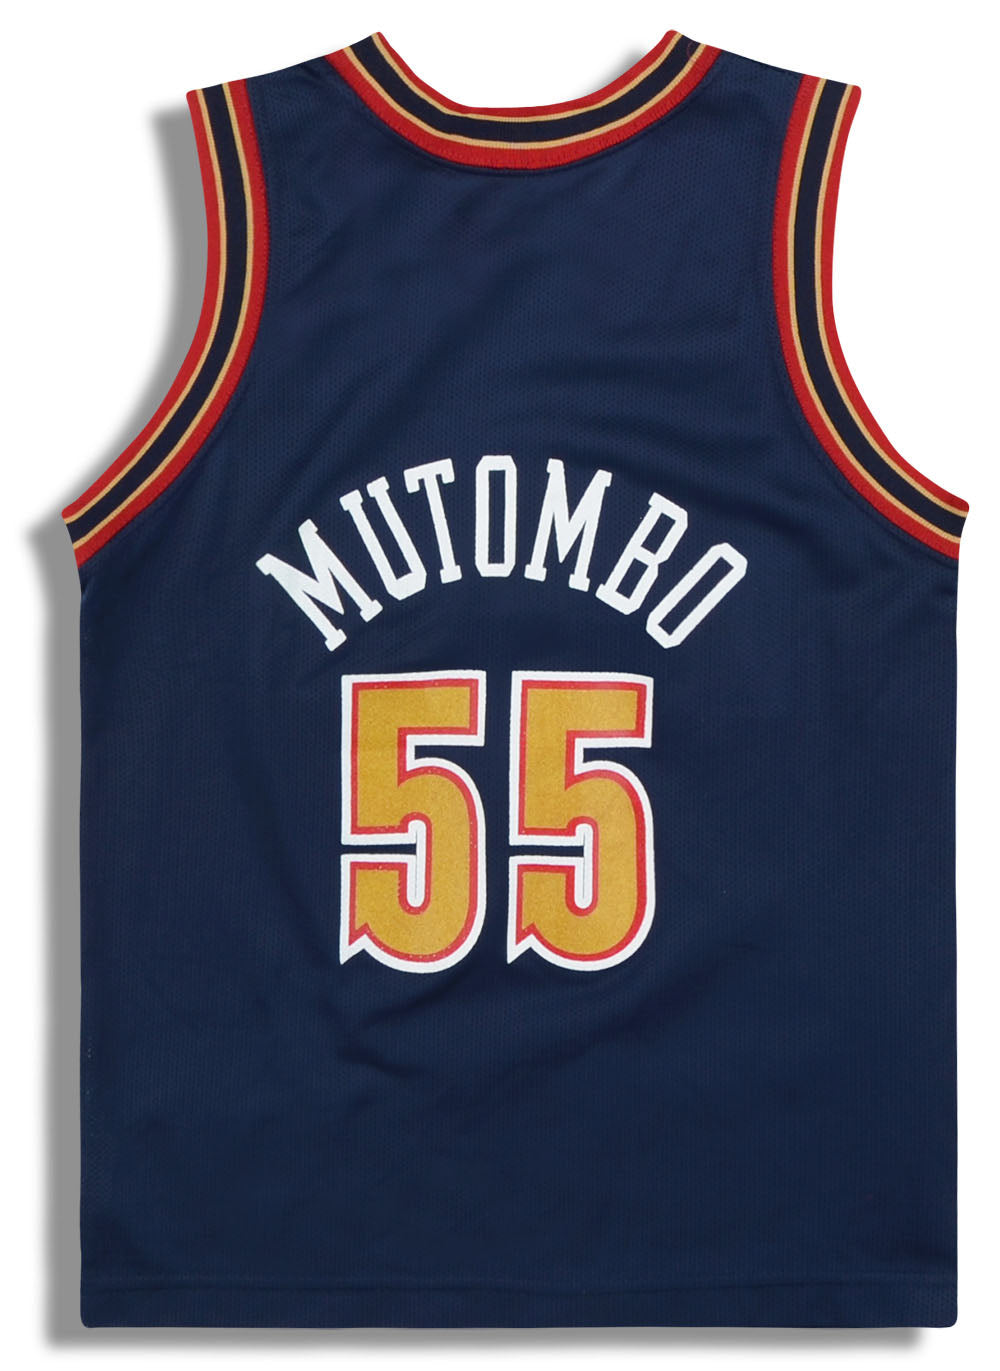 1993-95 DENVER NUGGETS MUTOMBO #55 CHAMPION JERSEY (AWAY) Y